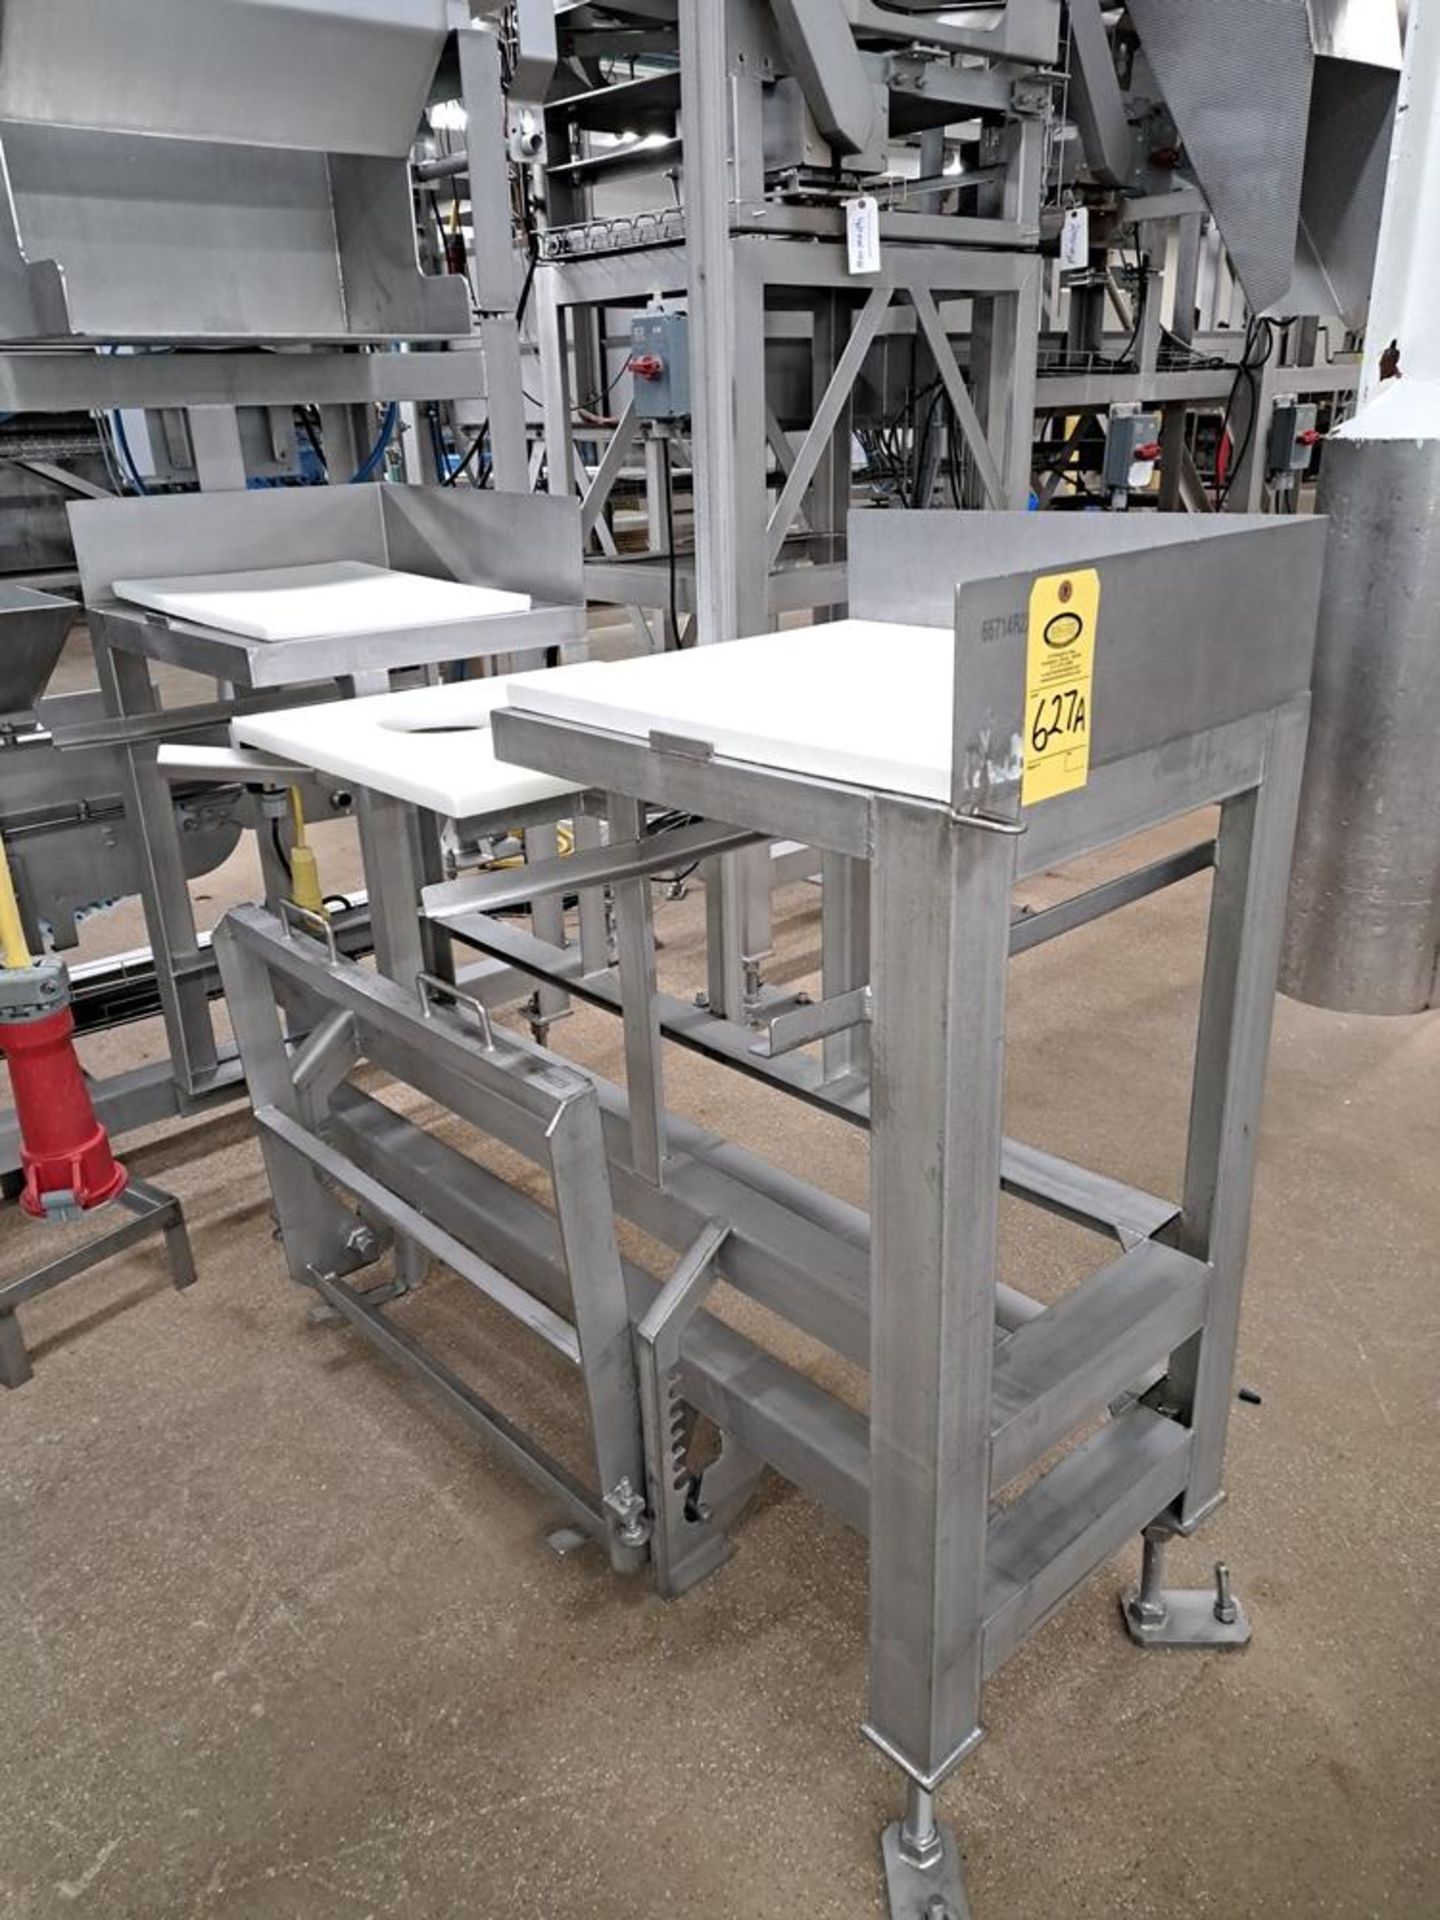 Stainless Steel Work Station, 22" W X 64" L with platform: Required Loading Fee $150.00, Rigger-Norm